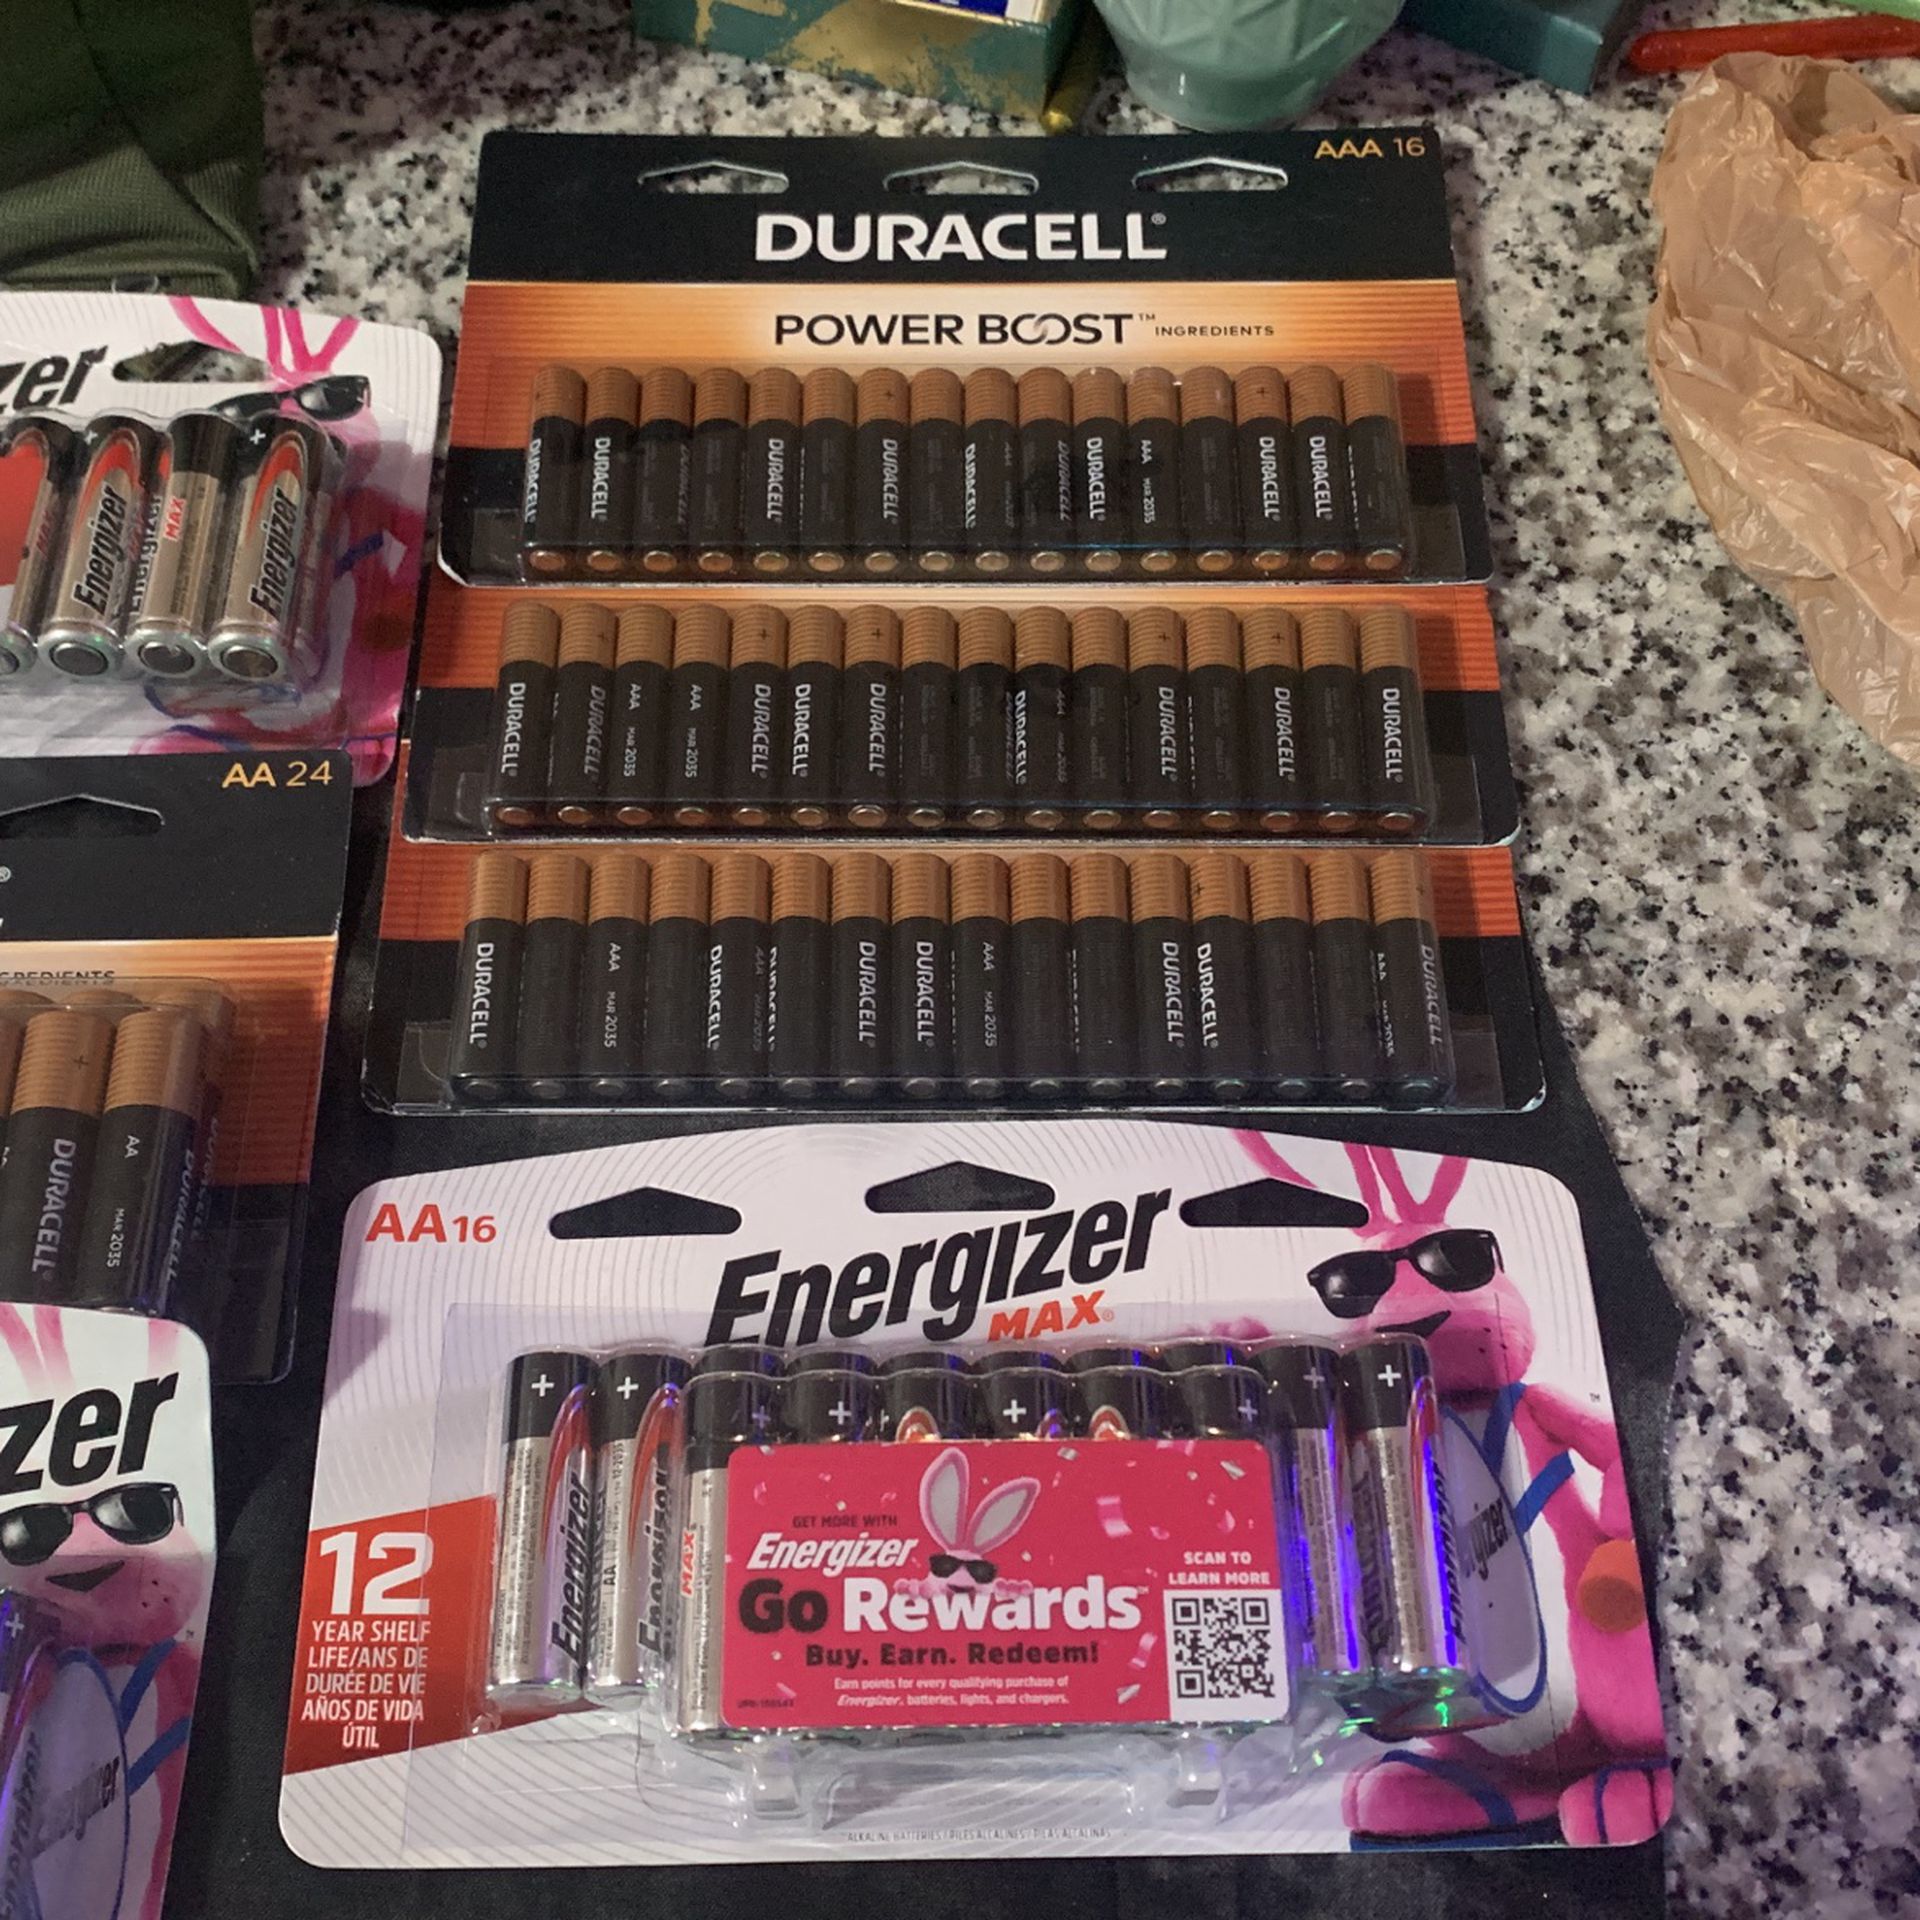 Three Packs Of Duracell 16 Packs, 1 Pack Of Energizer 16 Pack, 2 Packs Of 24 AA’s One Energizer And One Duracell And 2 Packs Of AA’s 8pack